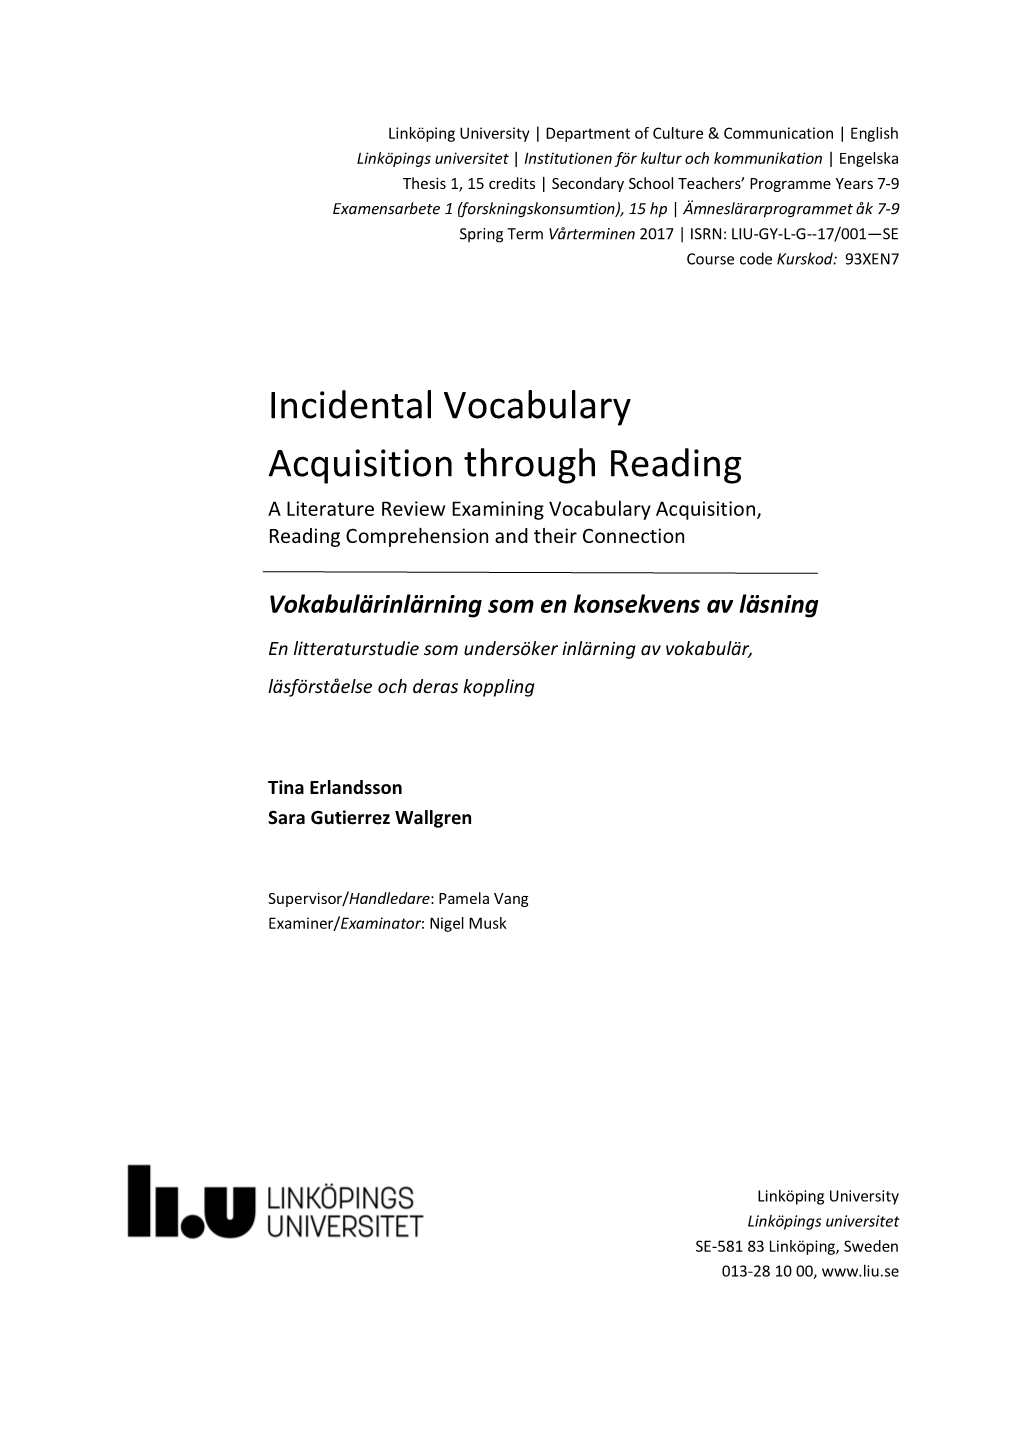 Incidental Vocabulary Acquisition Through Reading a Literature Review Examining Vocabulary Acquisition, Reading Comprehension and Their Connection